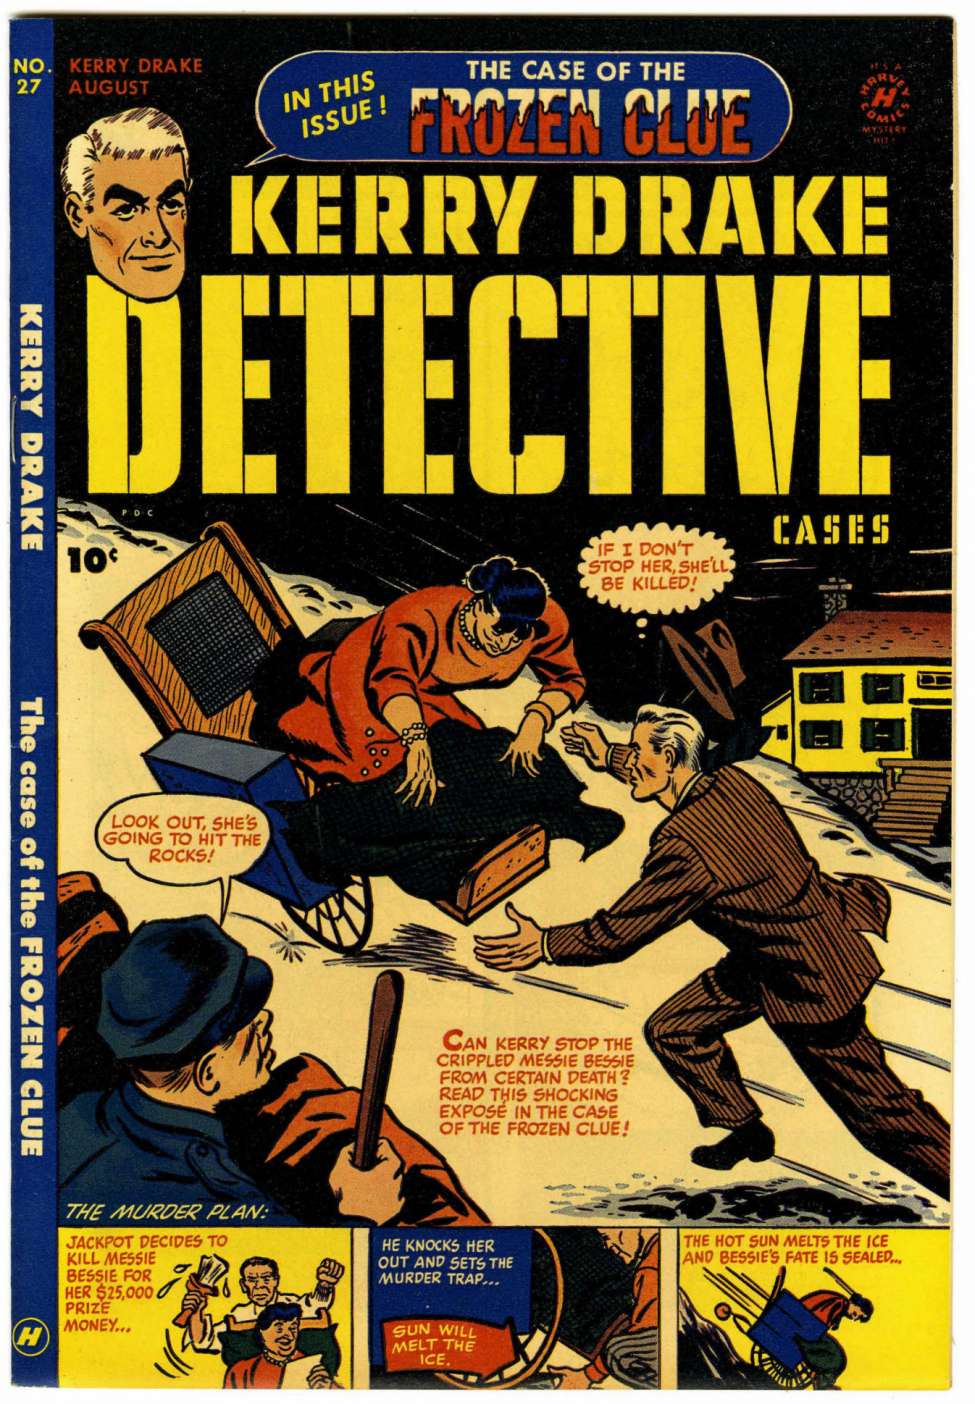 Book Cover For Kerry Drake Detective Cases 27